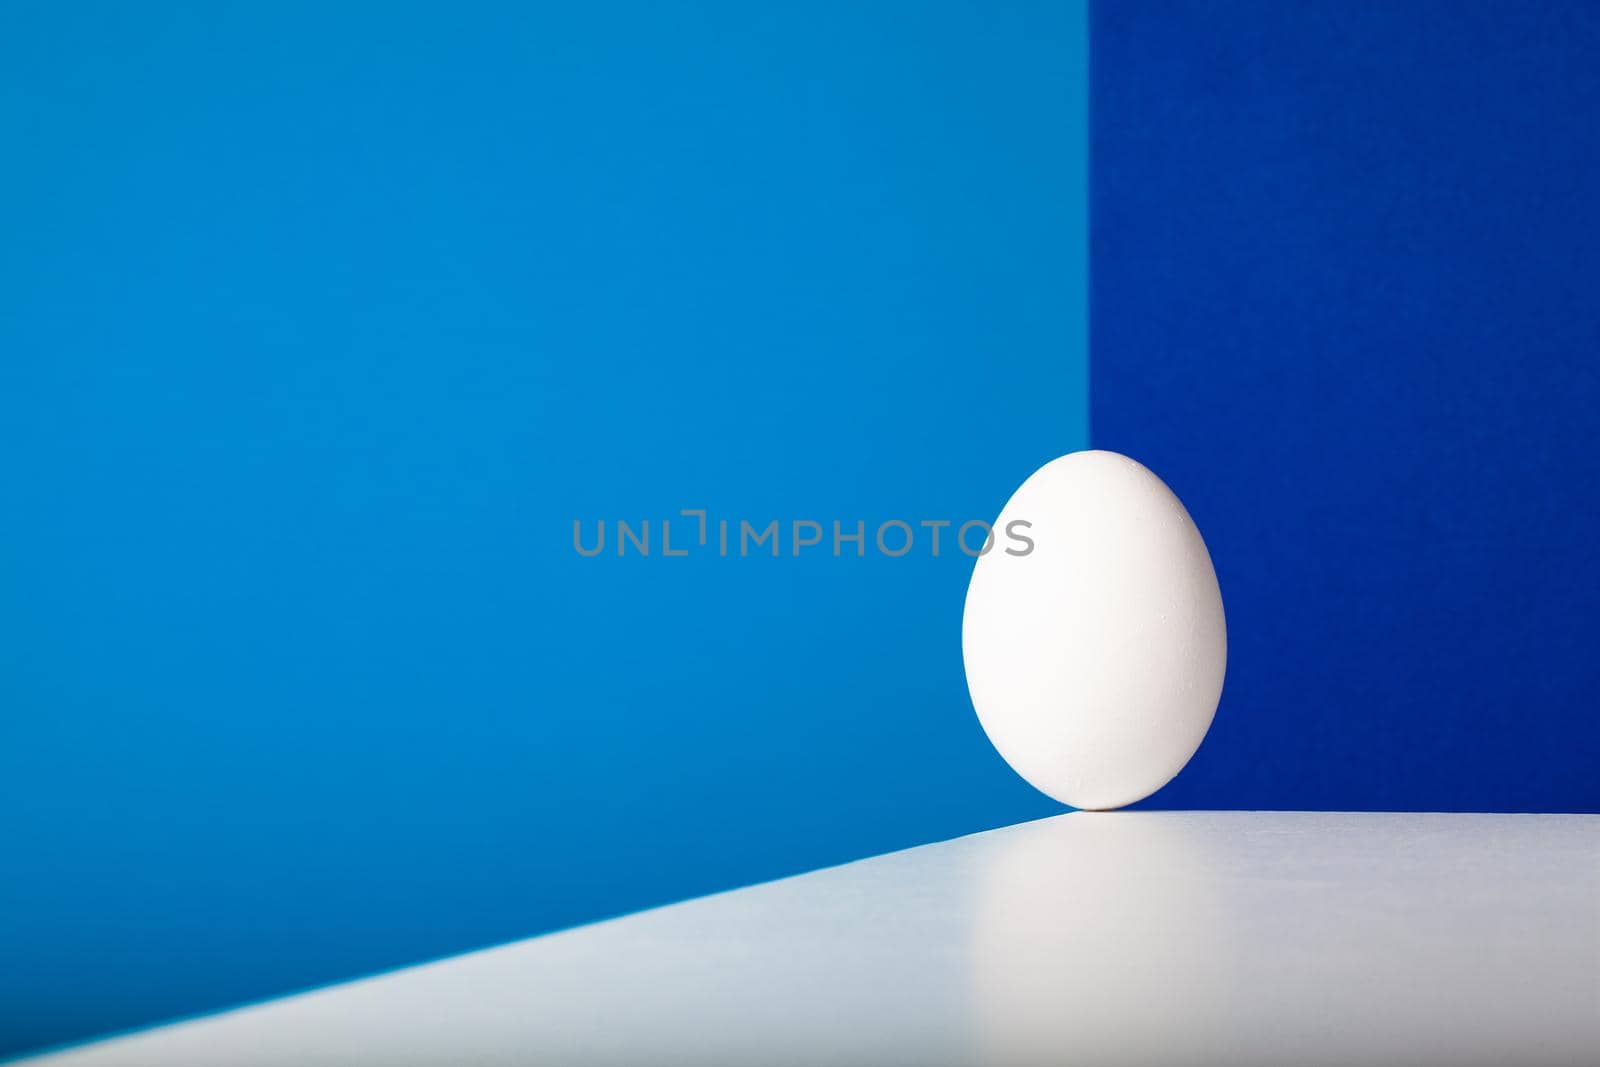 White egg balances on the edge of the white table in the blue room.